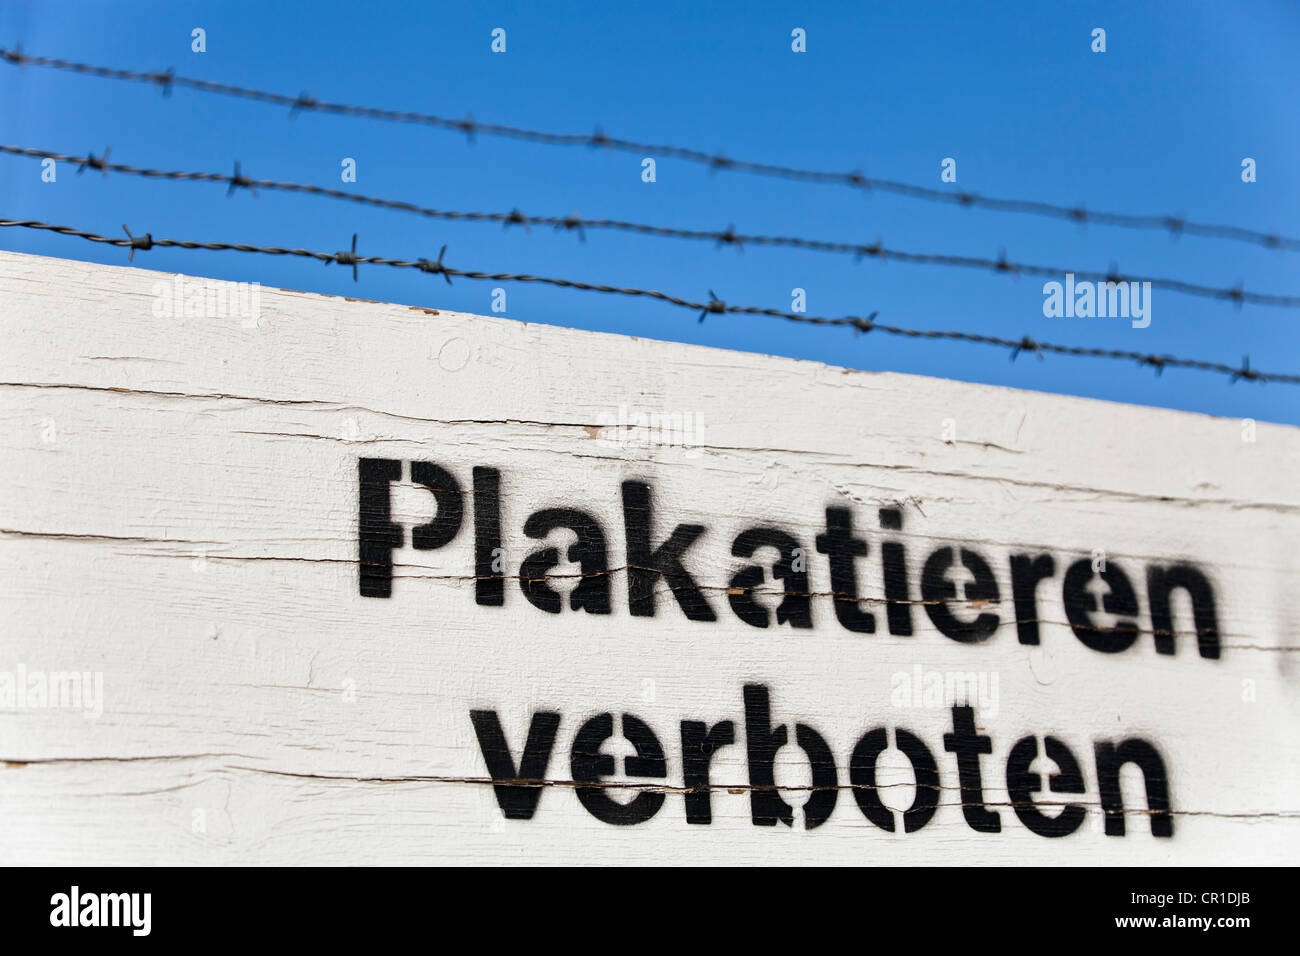 Plakatieren verboten, German for No bill-sticking!, lettering on a site fence, Mitte district, Berlin, Germany, Europe Stock Photo